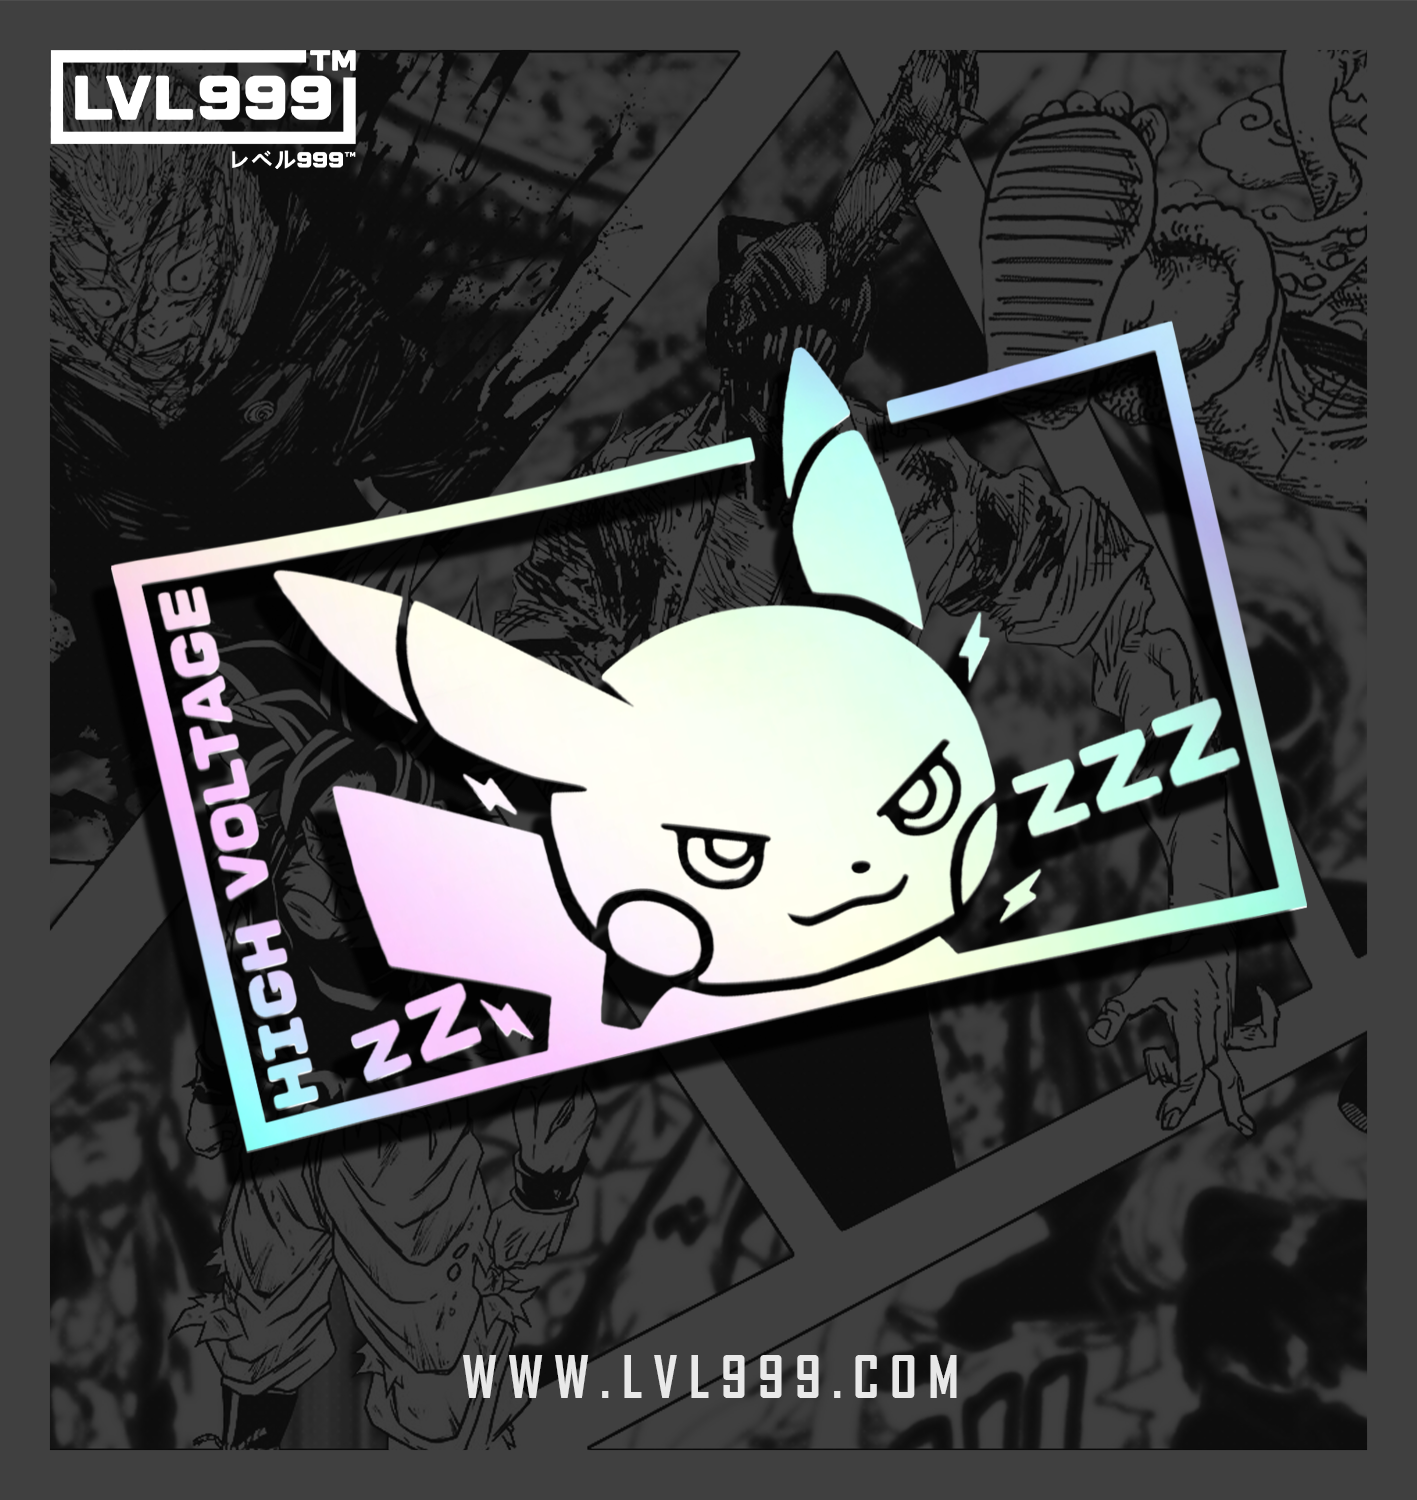 Pika #025 - Decal - High Voltage